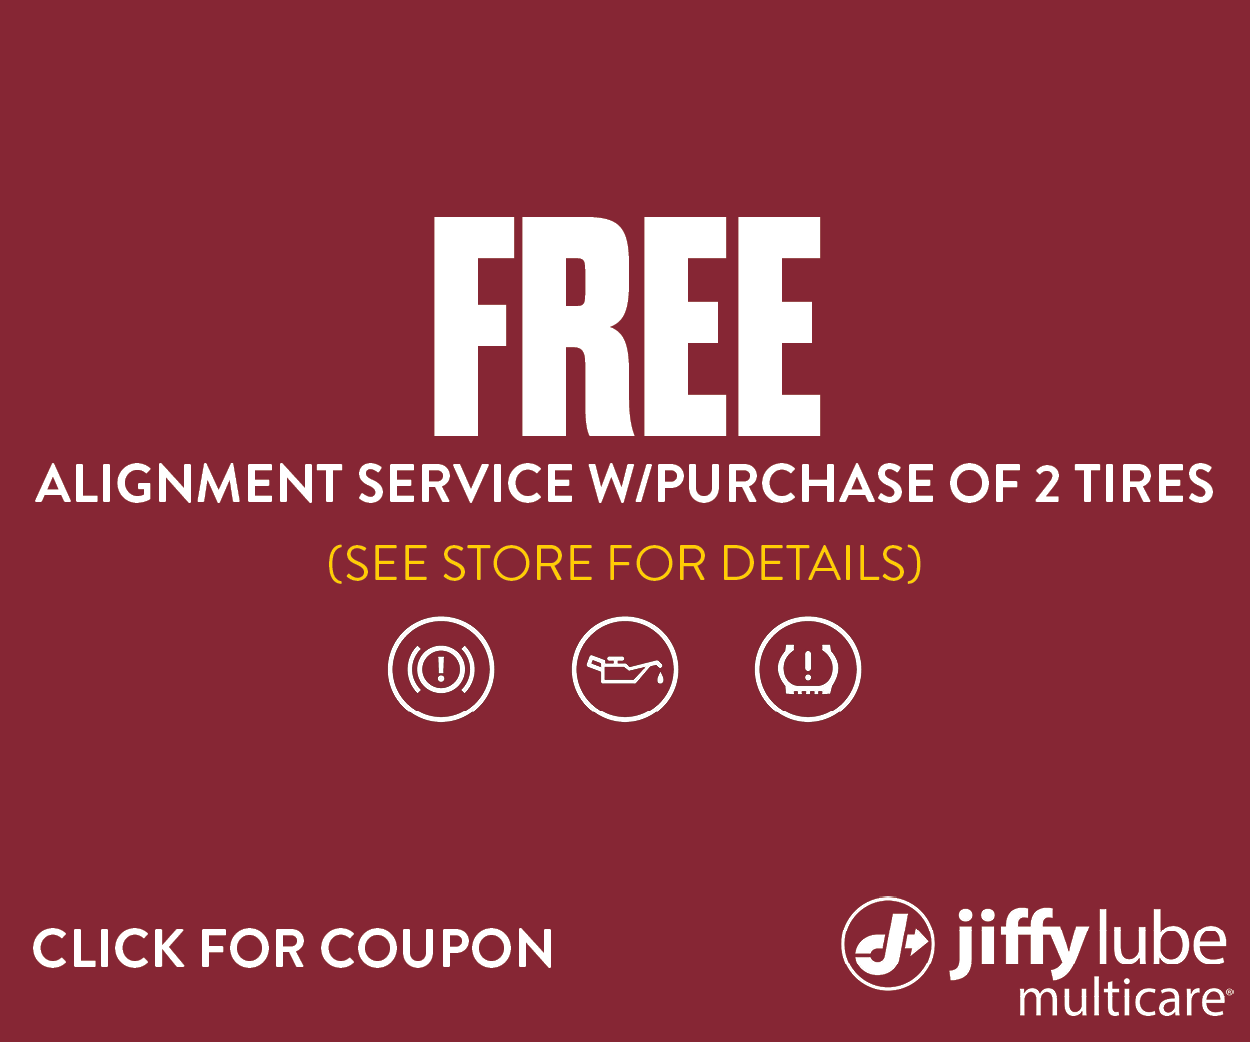 2024 – FREE Alignment Service W:Purchase of 2 Tires Image (Bronco Lube)